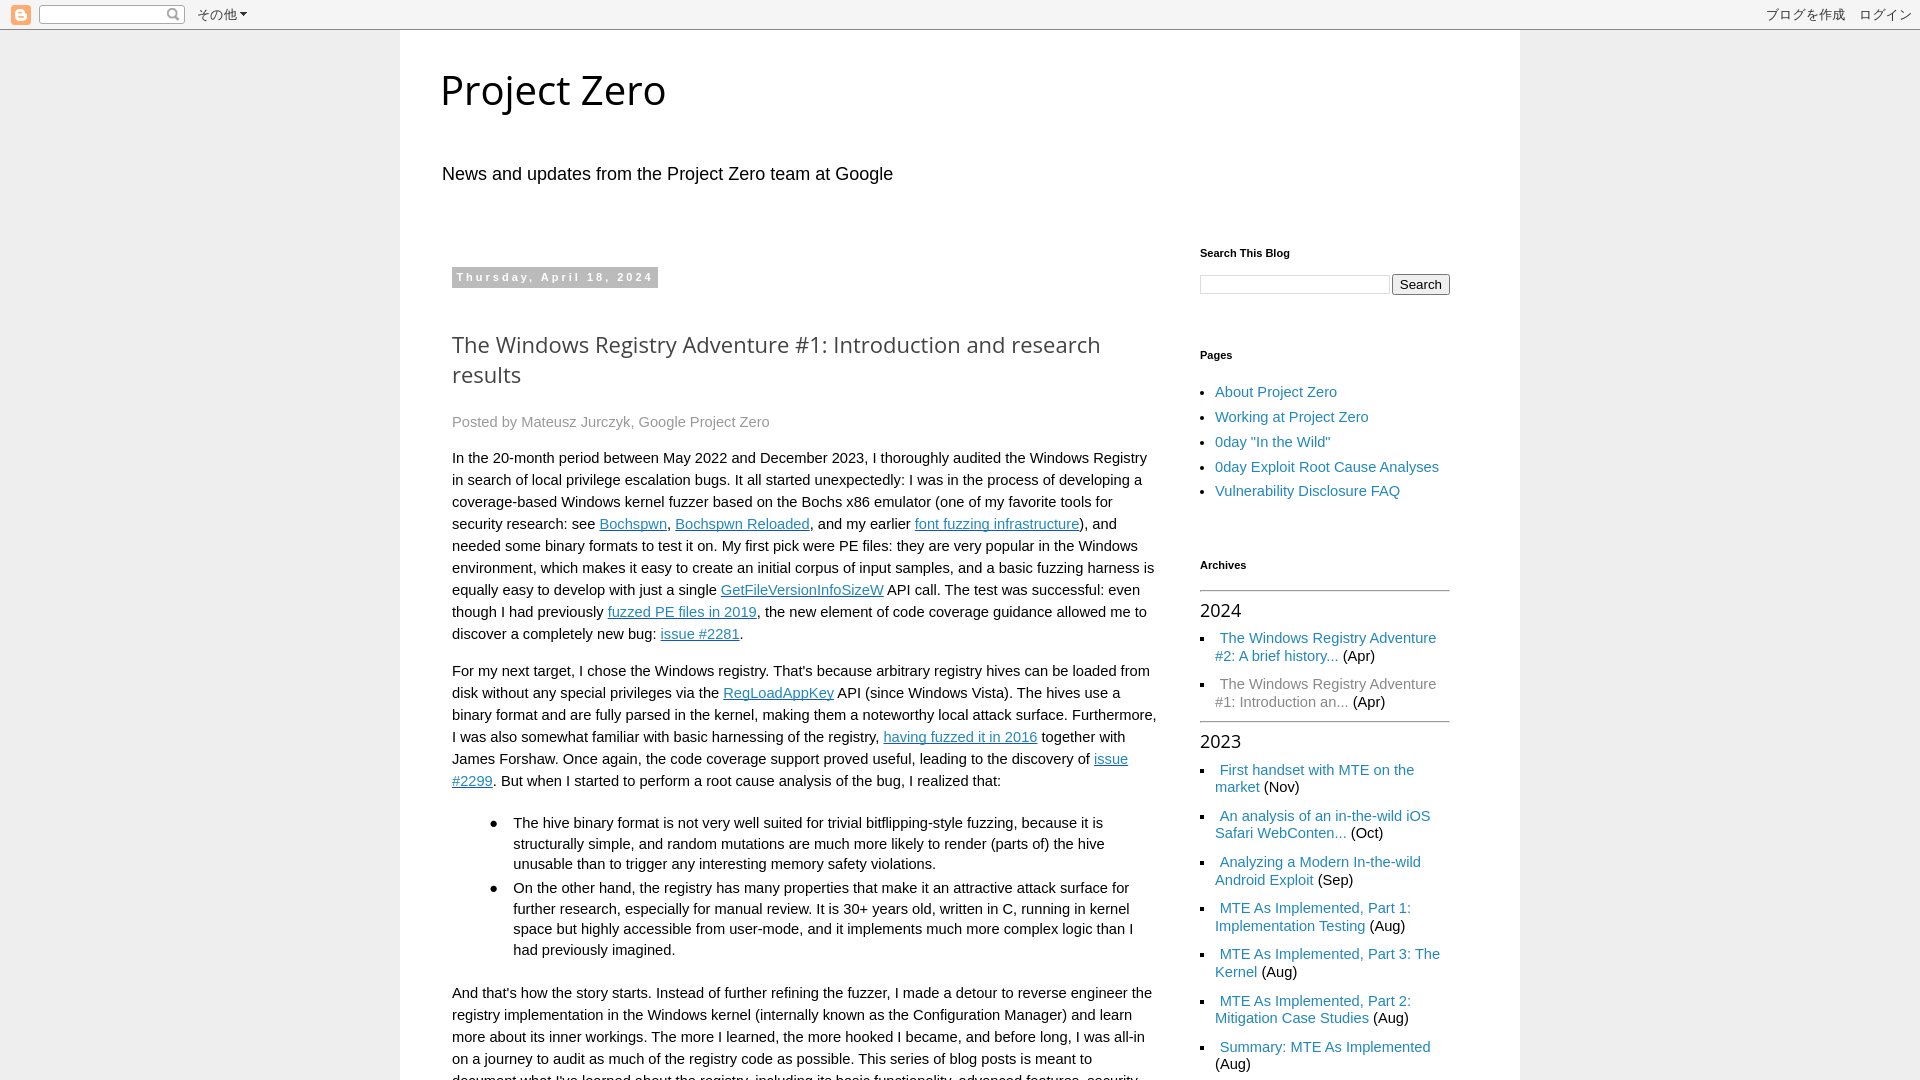 Project Zero: The Windows Registry Adventure #1: Introduction and research results